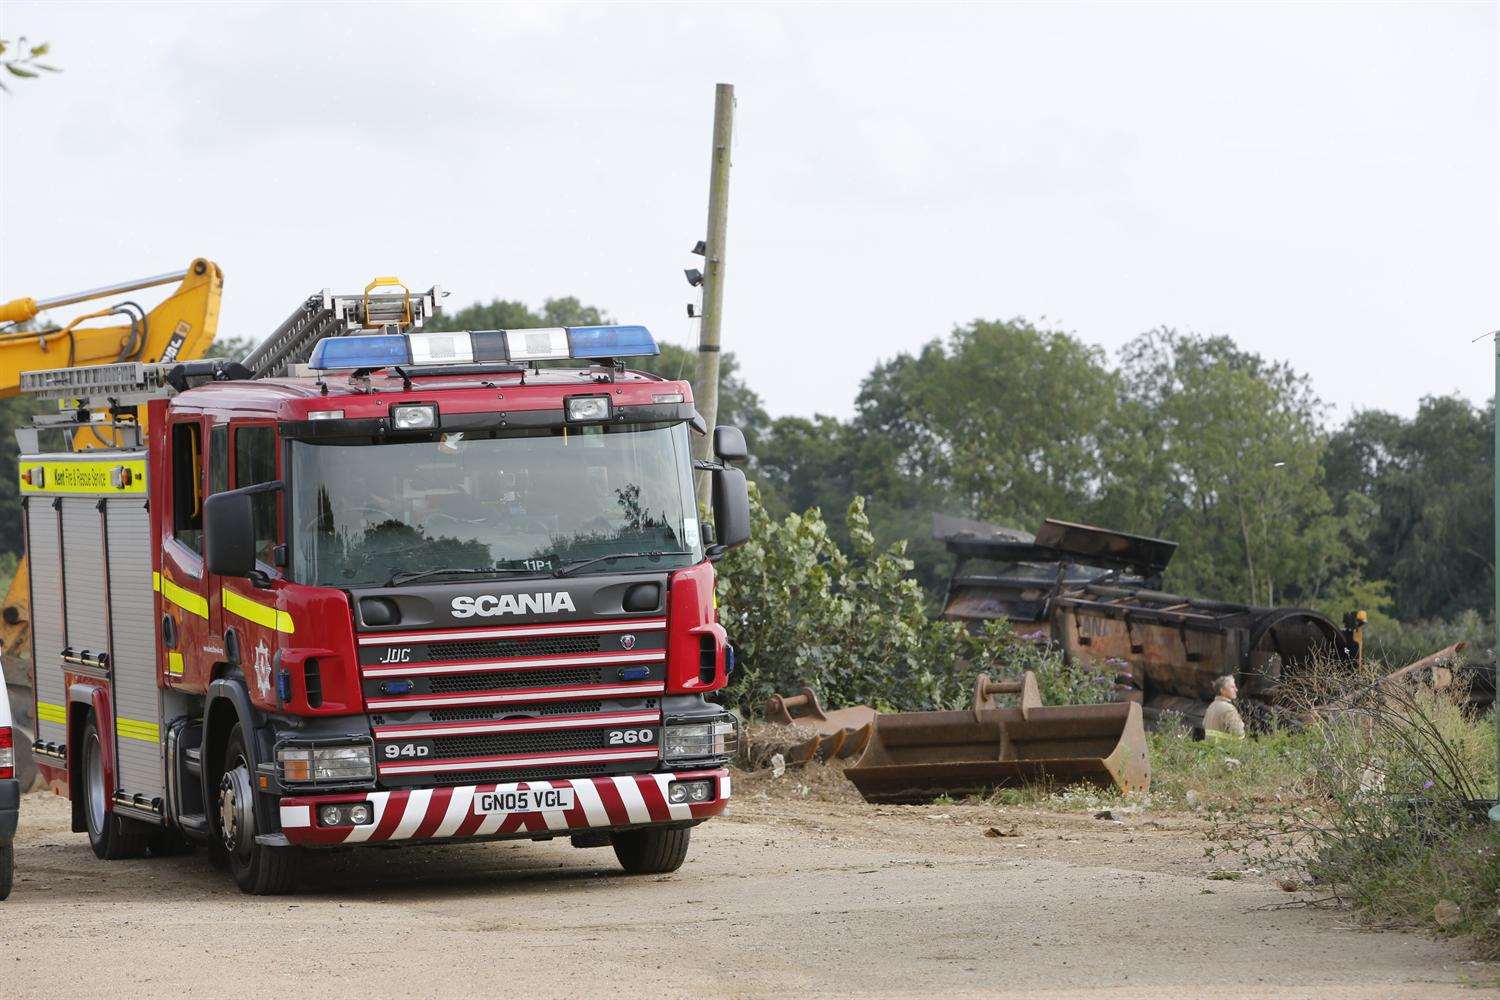 Firefighters damp down after a blaze at a landfill site in Tovil